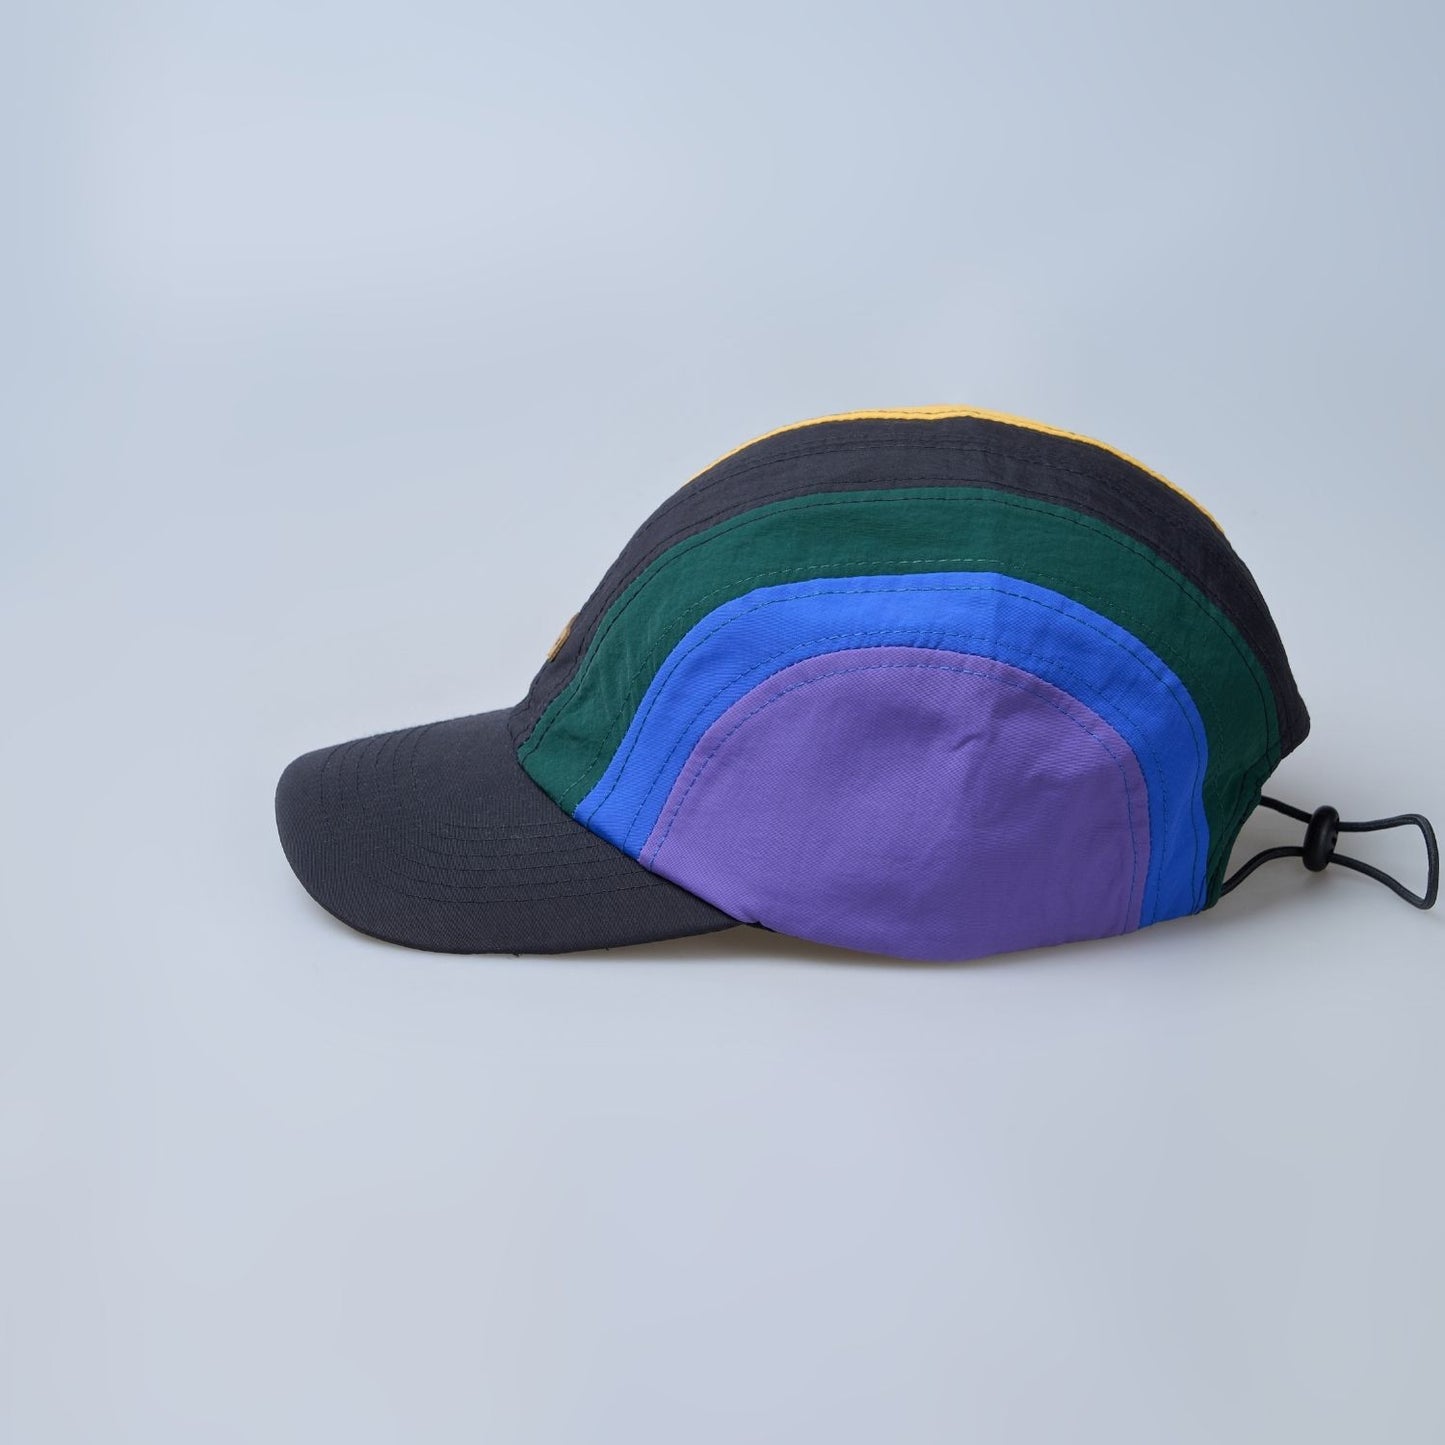 Multi colored, wide brim cap for men with adjustable strap, side view.